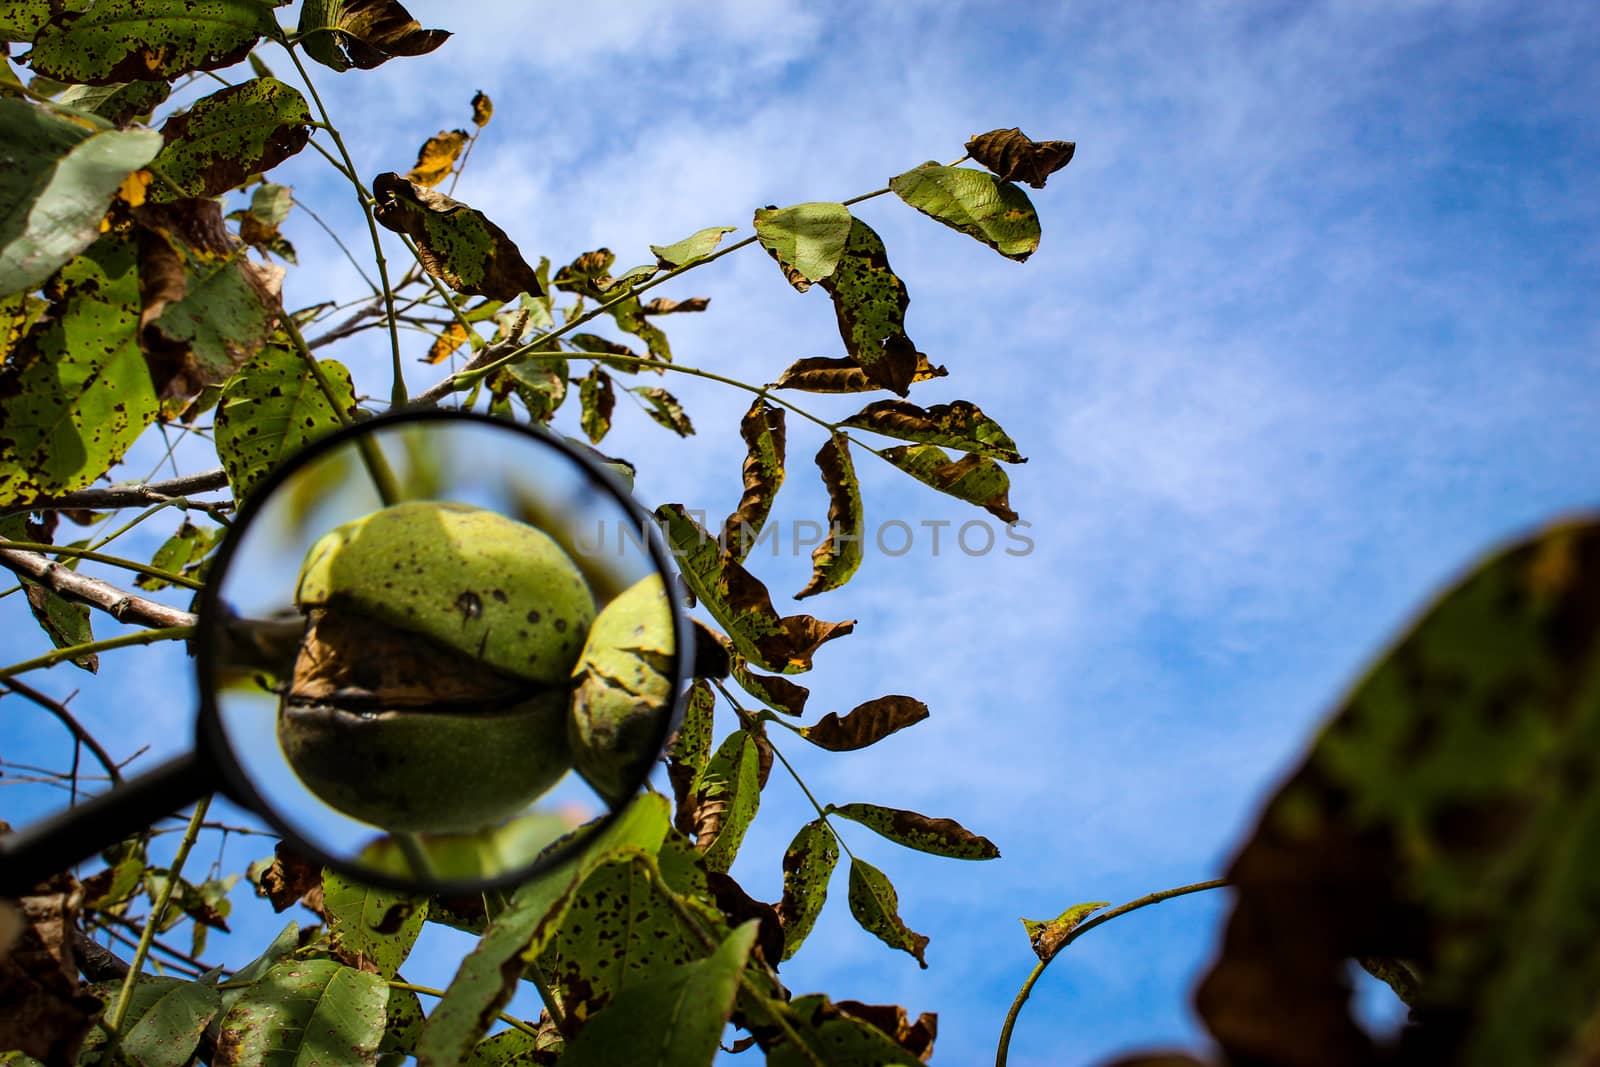 Walnut fruit enlarged with a magnifying glass. Close up of a ripe walnut inside a cracked green shell on a branch with the sky in the background. Zavidovici, Bosnia and Herzegovina.